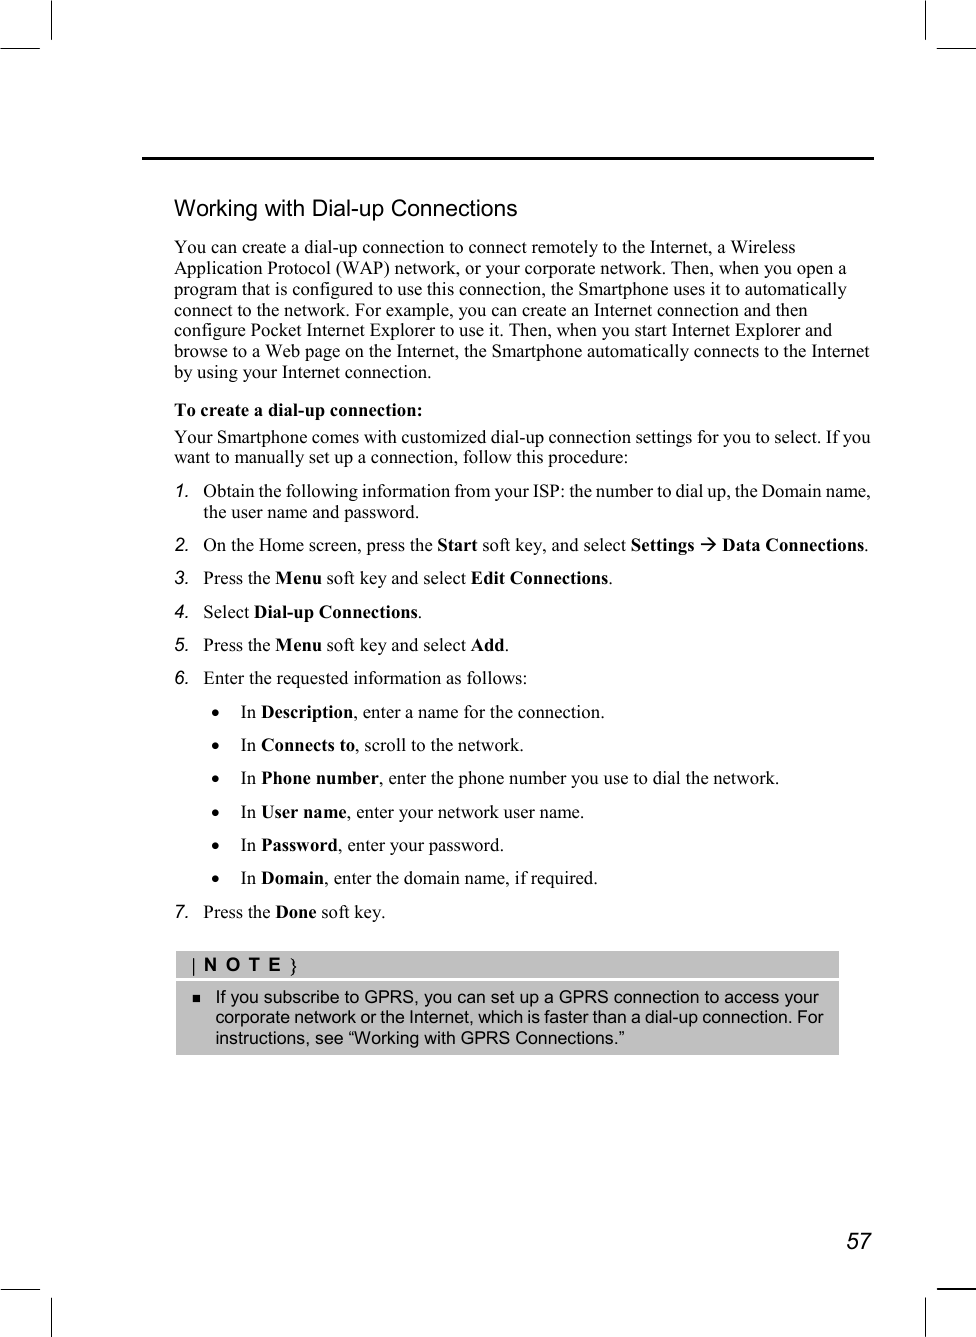   57  Working with Dial-up Connections You can create a dial-up connection to connect remotely to the Internet, a Wireless Application Protocol (WAP) network, or your corporate network. Then, when you open a program that is configured to use this connection, the Smartphone uses it to automatically connect to the network. For example, you can create an Internet connection and then configure Pocket Internet Explorer to use it. Then, when you start Internet Explorer and browse to a Web page on the Internet, the Smartphone automatically connects to the Internet by using your Internet connection. To create a dial-up connection: Your Smartphone comes with customized dial-up connection settings for you to select. If you want to manually set up a connection, follow this procedure: 1.  Obtain the following information from your ISP: the number to dial up, the Domain name, the user name and password. 2.  On the Home screen, press the Start soft key, and select Settings  Data Connections. 3.  Press the Menu soft key and select Edit Connections. 4.  Select Dial-up Connections. 5.  Press the Menu soft key and select Add. 6.  Enter the requested information as follows: •  In Description, enter a name for the connection. •  In Connects to, scroll to the network. •  In Phone number, enter the phone number you use to dial the network. •  In User name, enter your network user name. •  In Password, enter your password. •  In Domain, enter the domain name, if required. 7.  Press the Done soft key.  |NOTE}   If you subscribe to GPRS, you can set up a GPRS connection to access your corporate network or the Internet, which is faster than a dial-up connection. For instructions, see “Working with GPRS Connections.”  